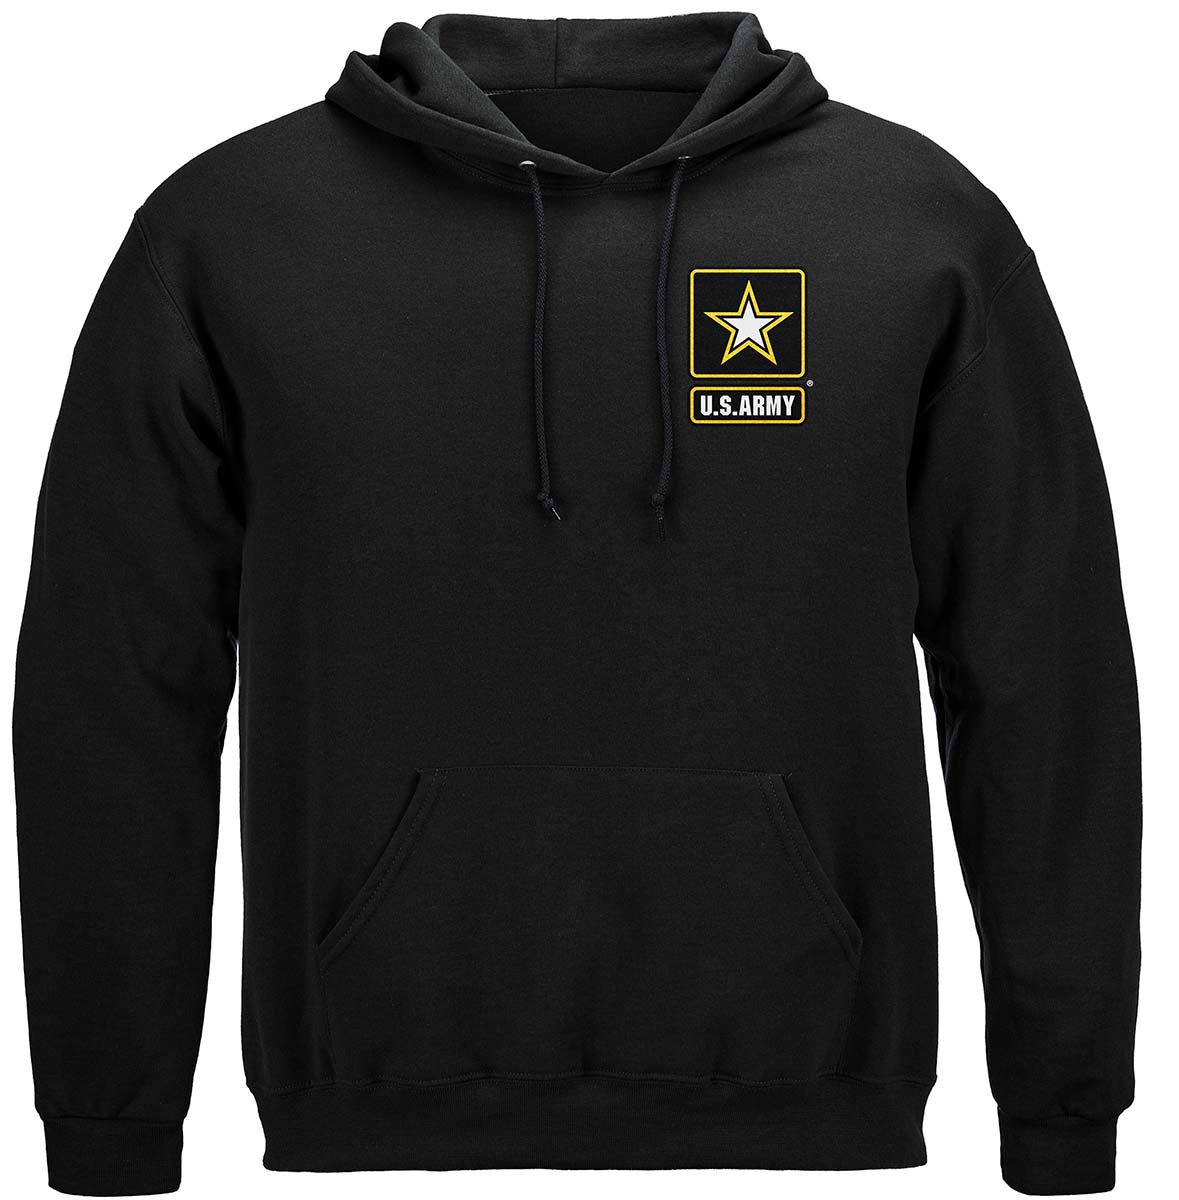 Army Strong Helicopter Solider Premium Long Sleeves